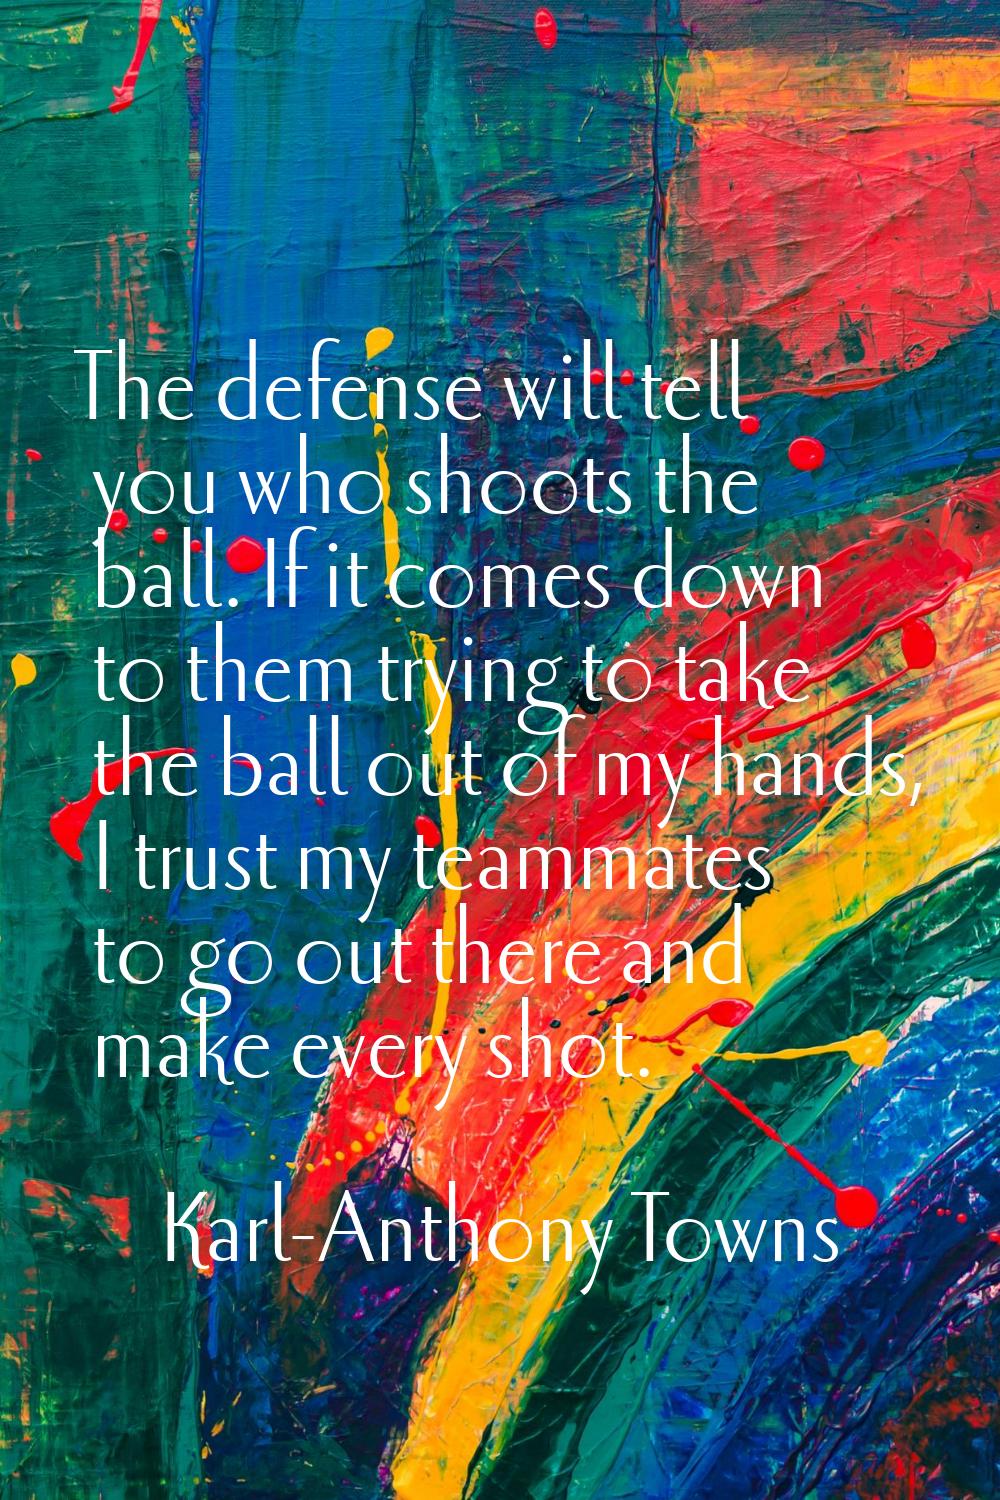 The defense will tell you who shoots the ball. If it comes down to them trying to take the ball out